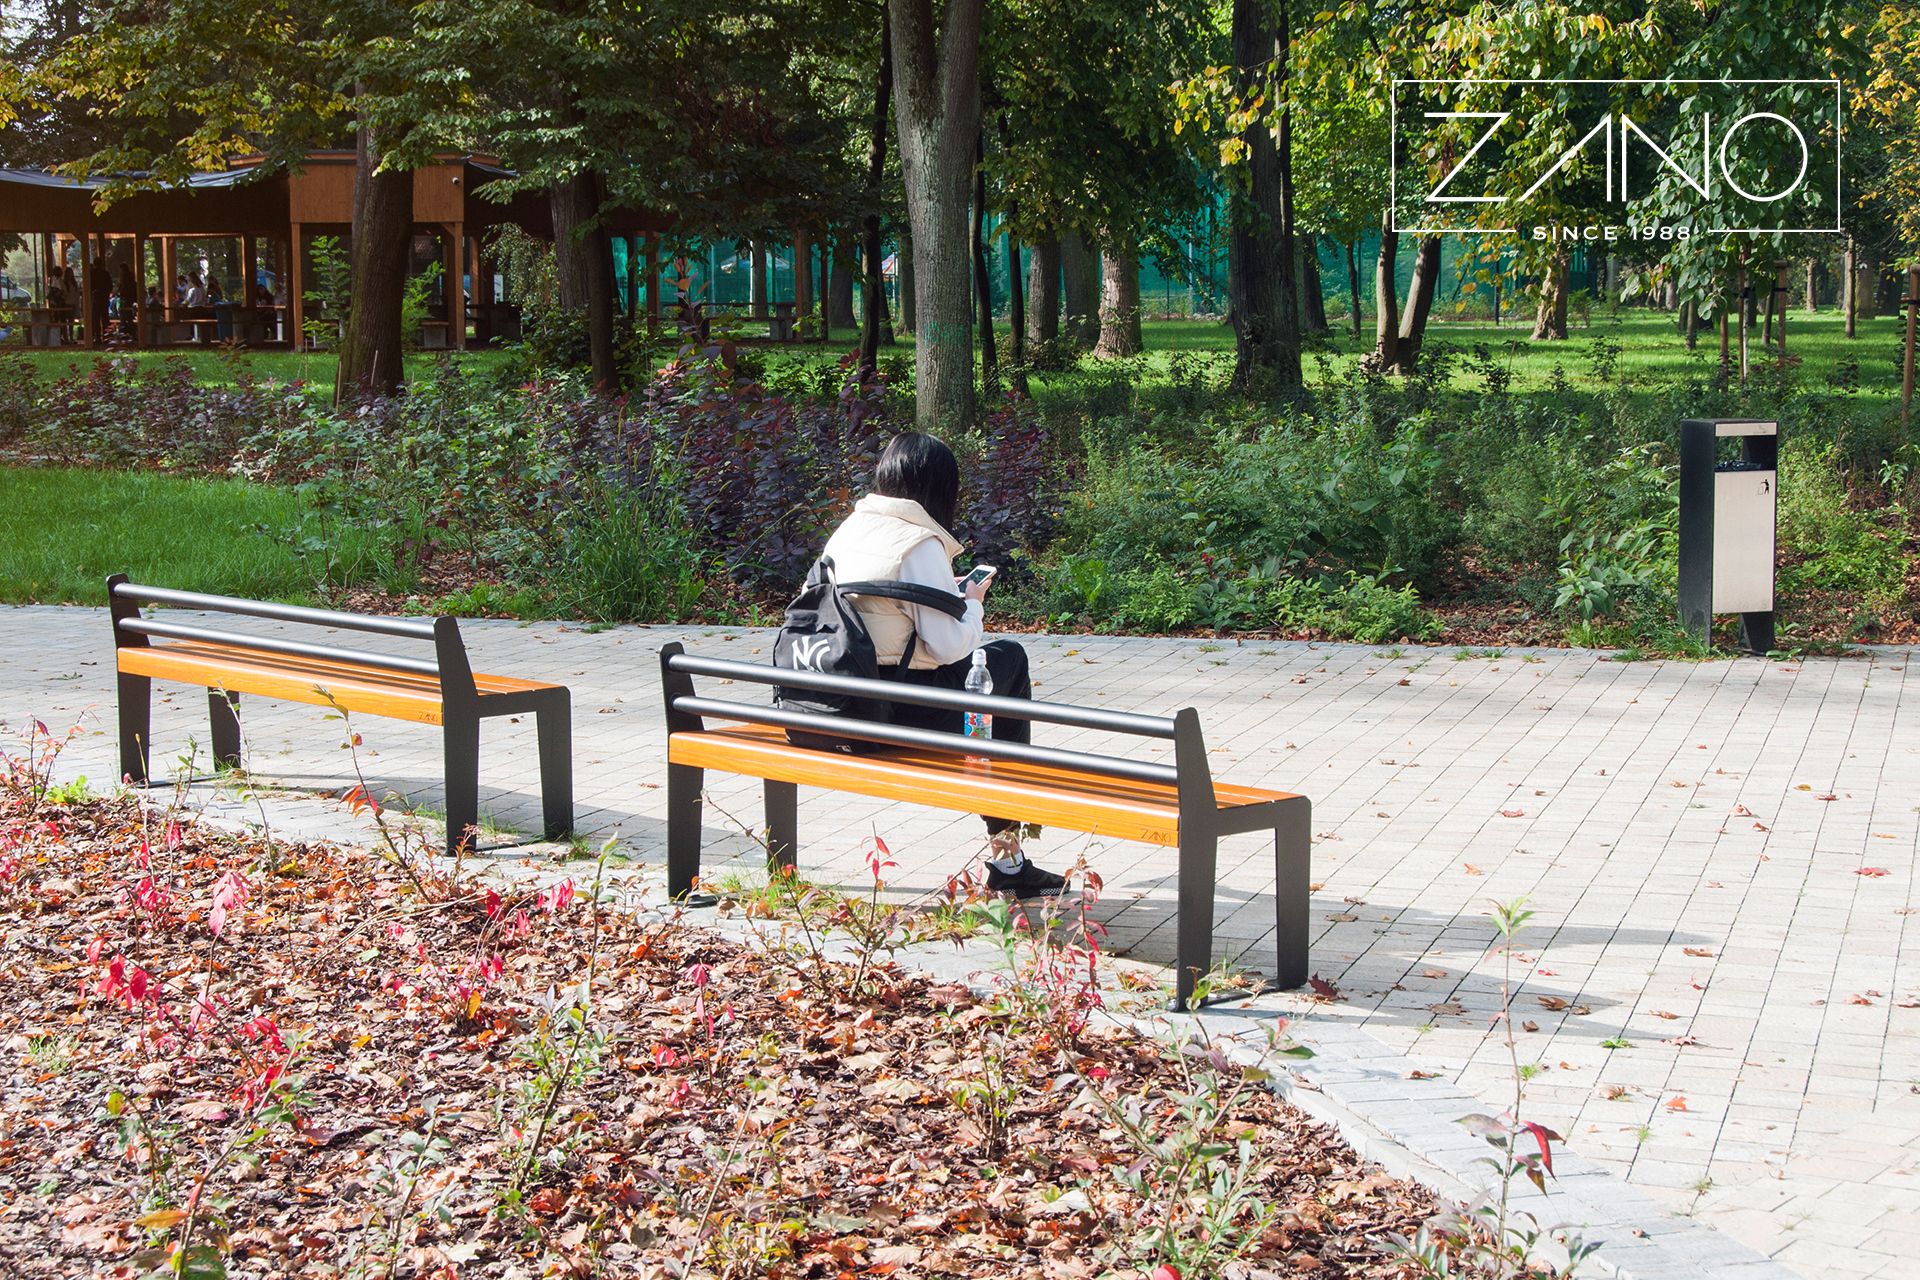 Park benches Reliq and litter bin Simple